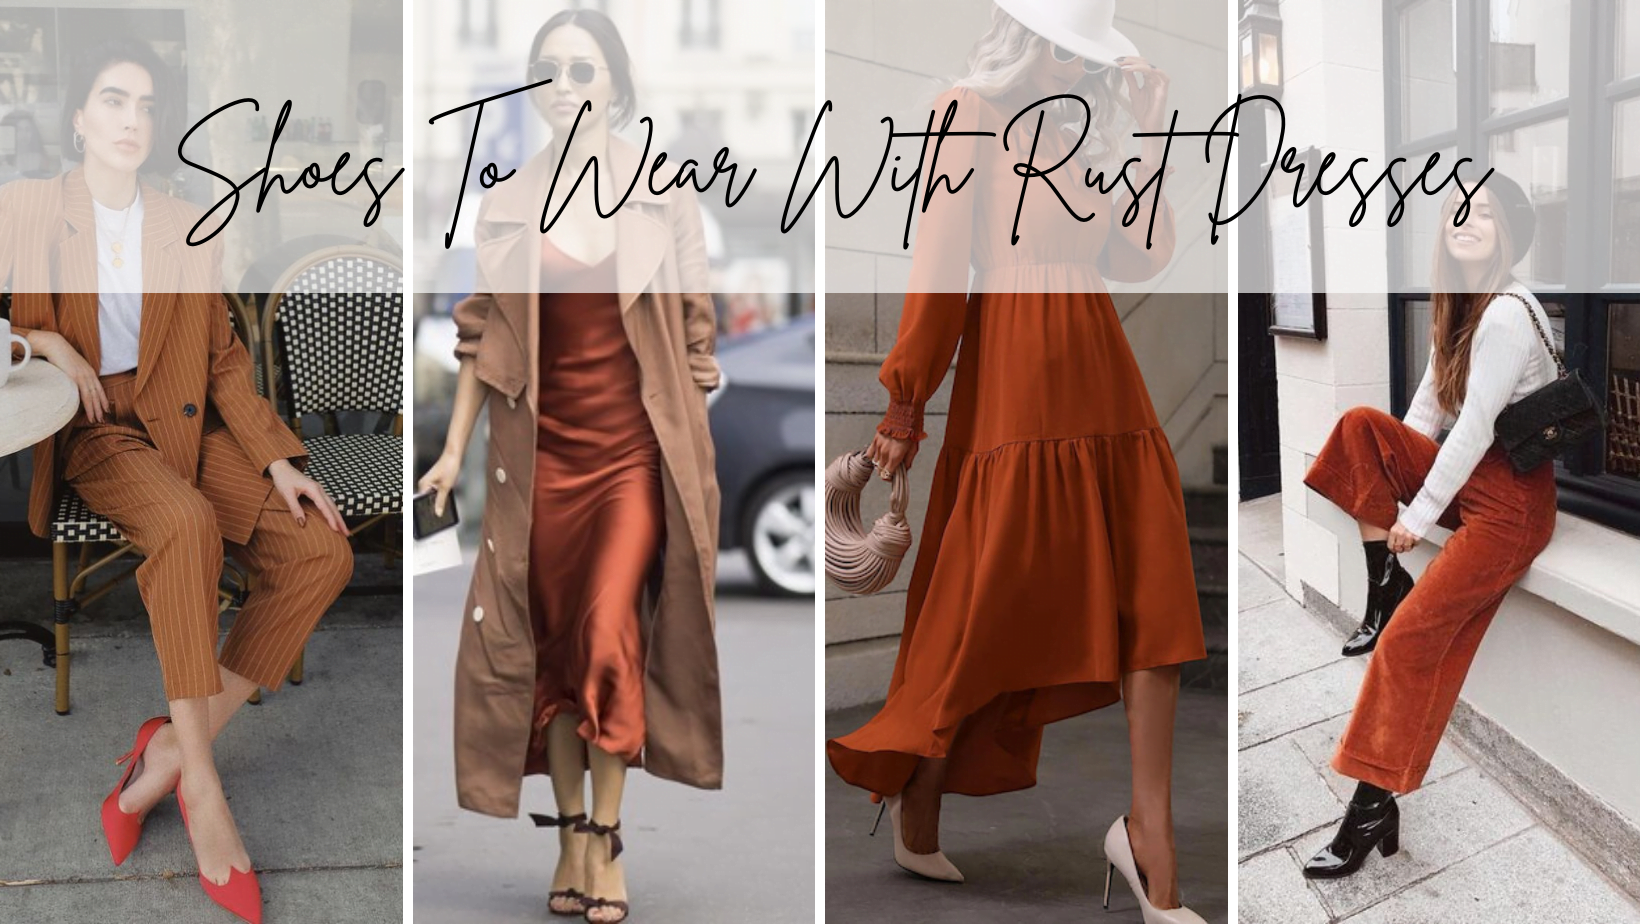 What color shoes to wear with rust dress